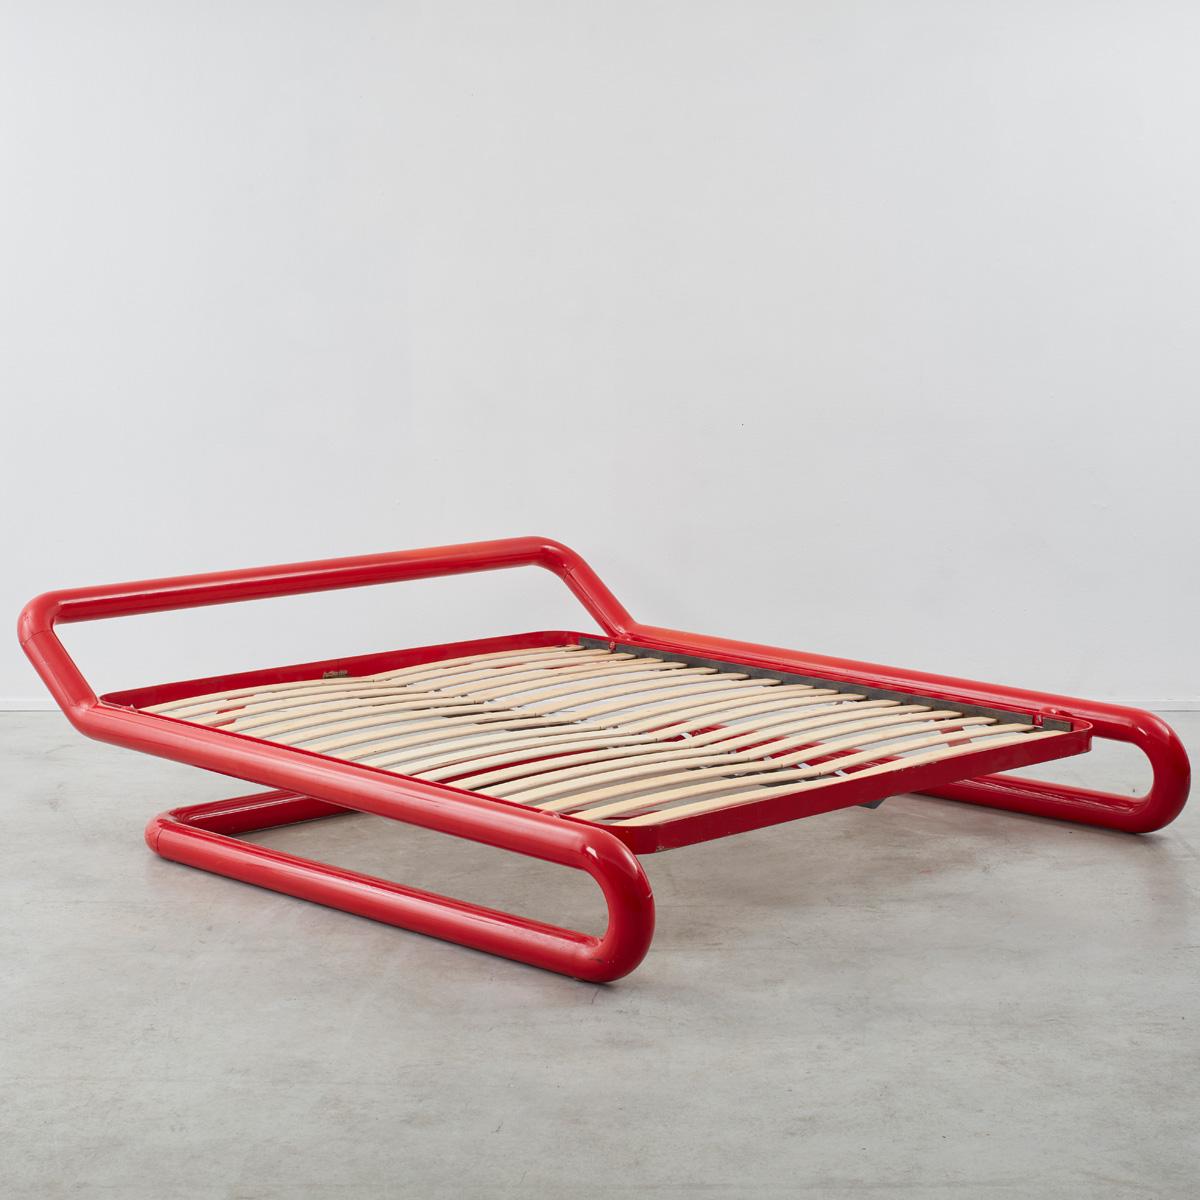 Rare red enamel cantilever bed frame by visionary architect Marzio Cecchi (b1940 – 1990). Produced by his design practice Studio Most, his pieces were limited run made-to-order, and so are highly scarce and collectible. Cecchi could be said to be a